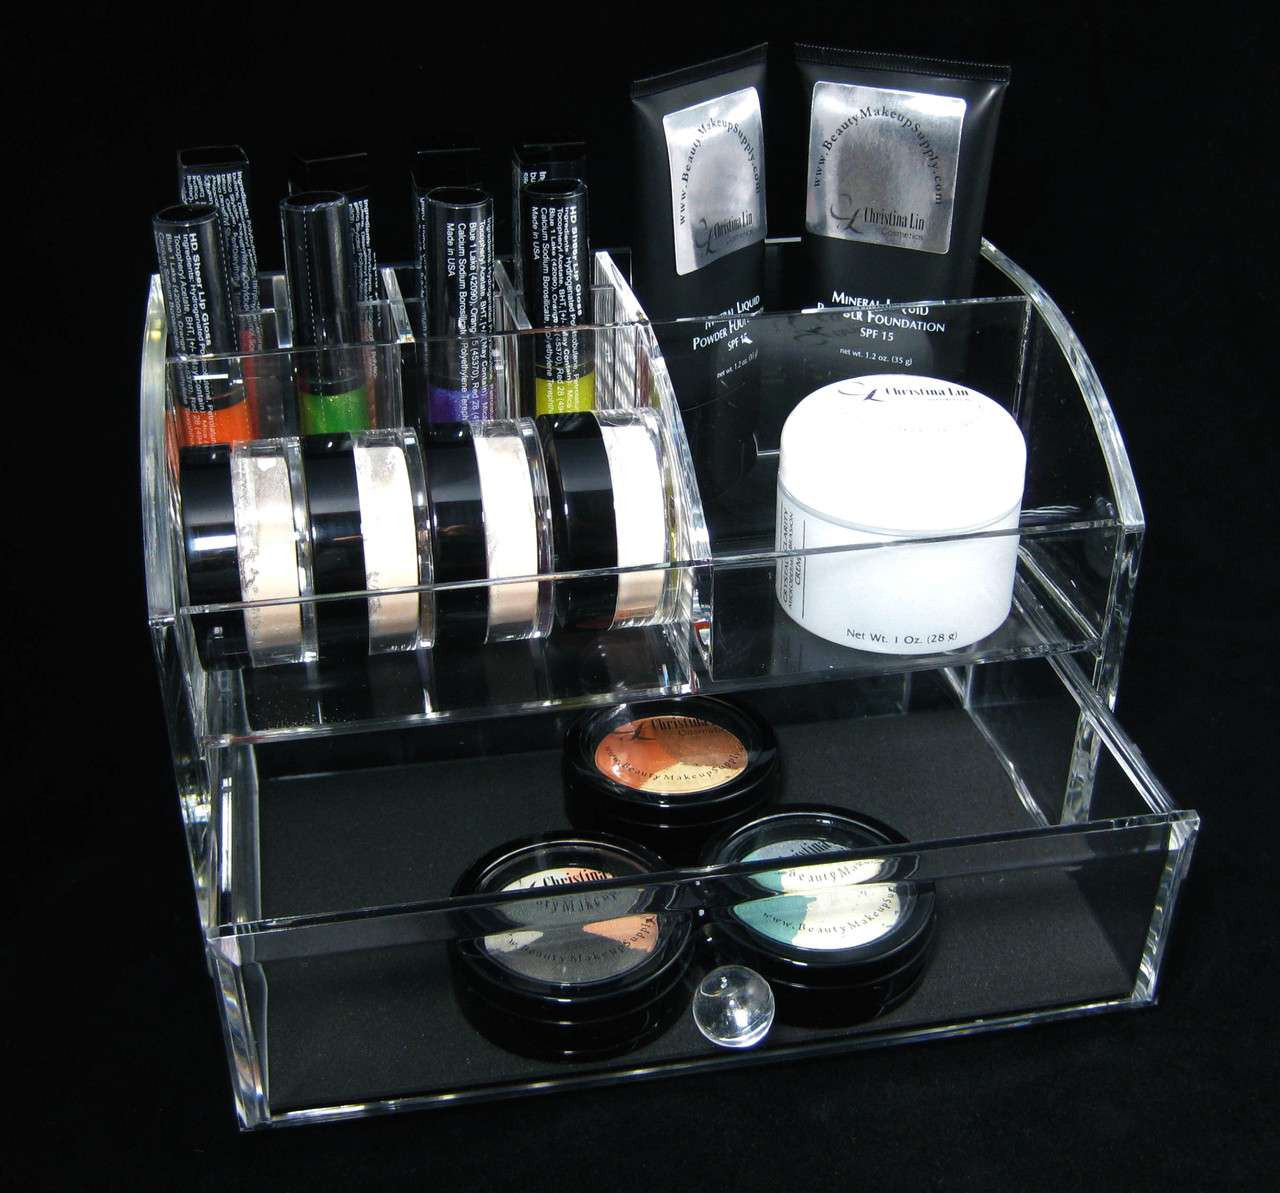 https://cdn11.bigcommerce.com/s-qd7k5gxi/images/stencil/1280x1280/products/313/6730/Deluxe-Acrylic-Cosmetic-Makeup-Drawer-Organizers-5633-Beauty-Makeup-Supply_4062__71678.1661384212.jpg?c=2